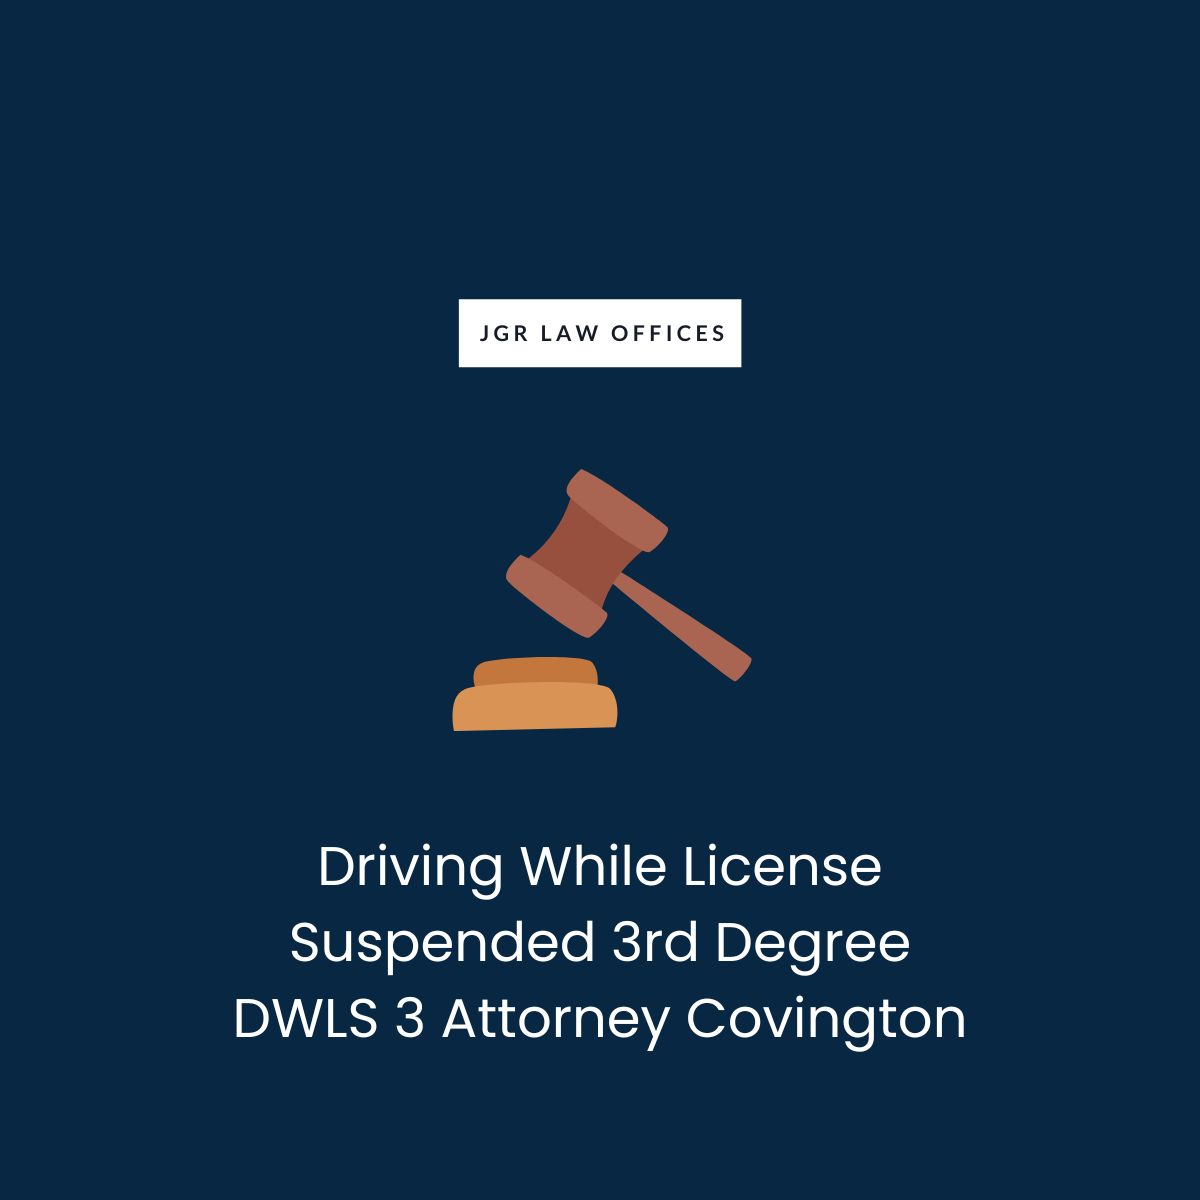 Driving While License Suspended 3rd Degree DWLS 3 Attorney Covington